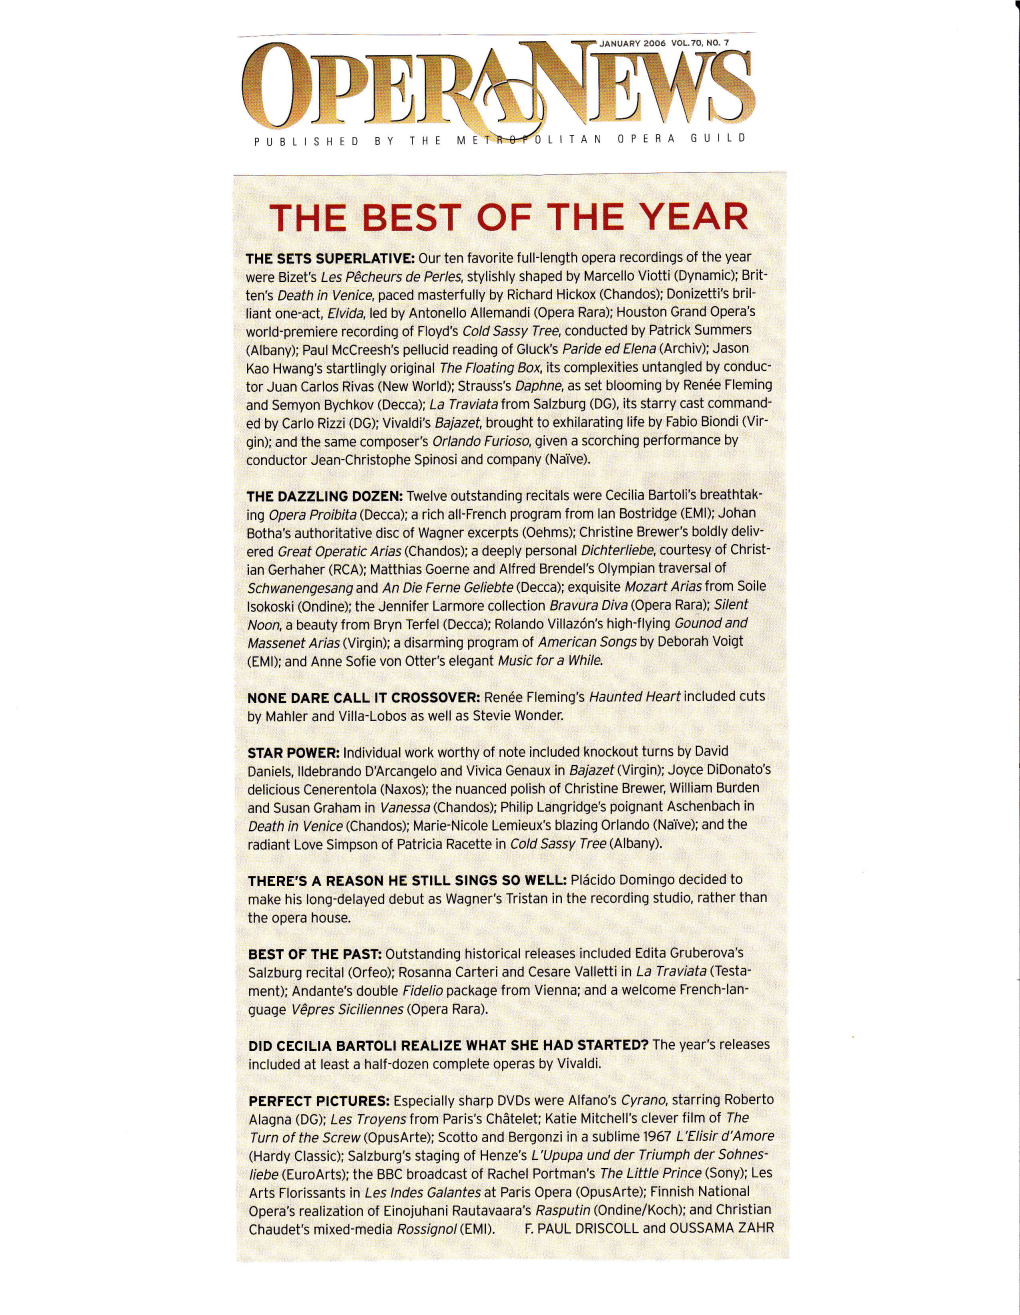 The Best of the Year